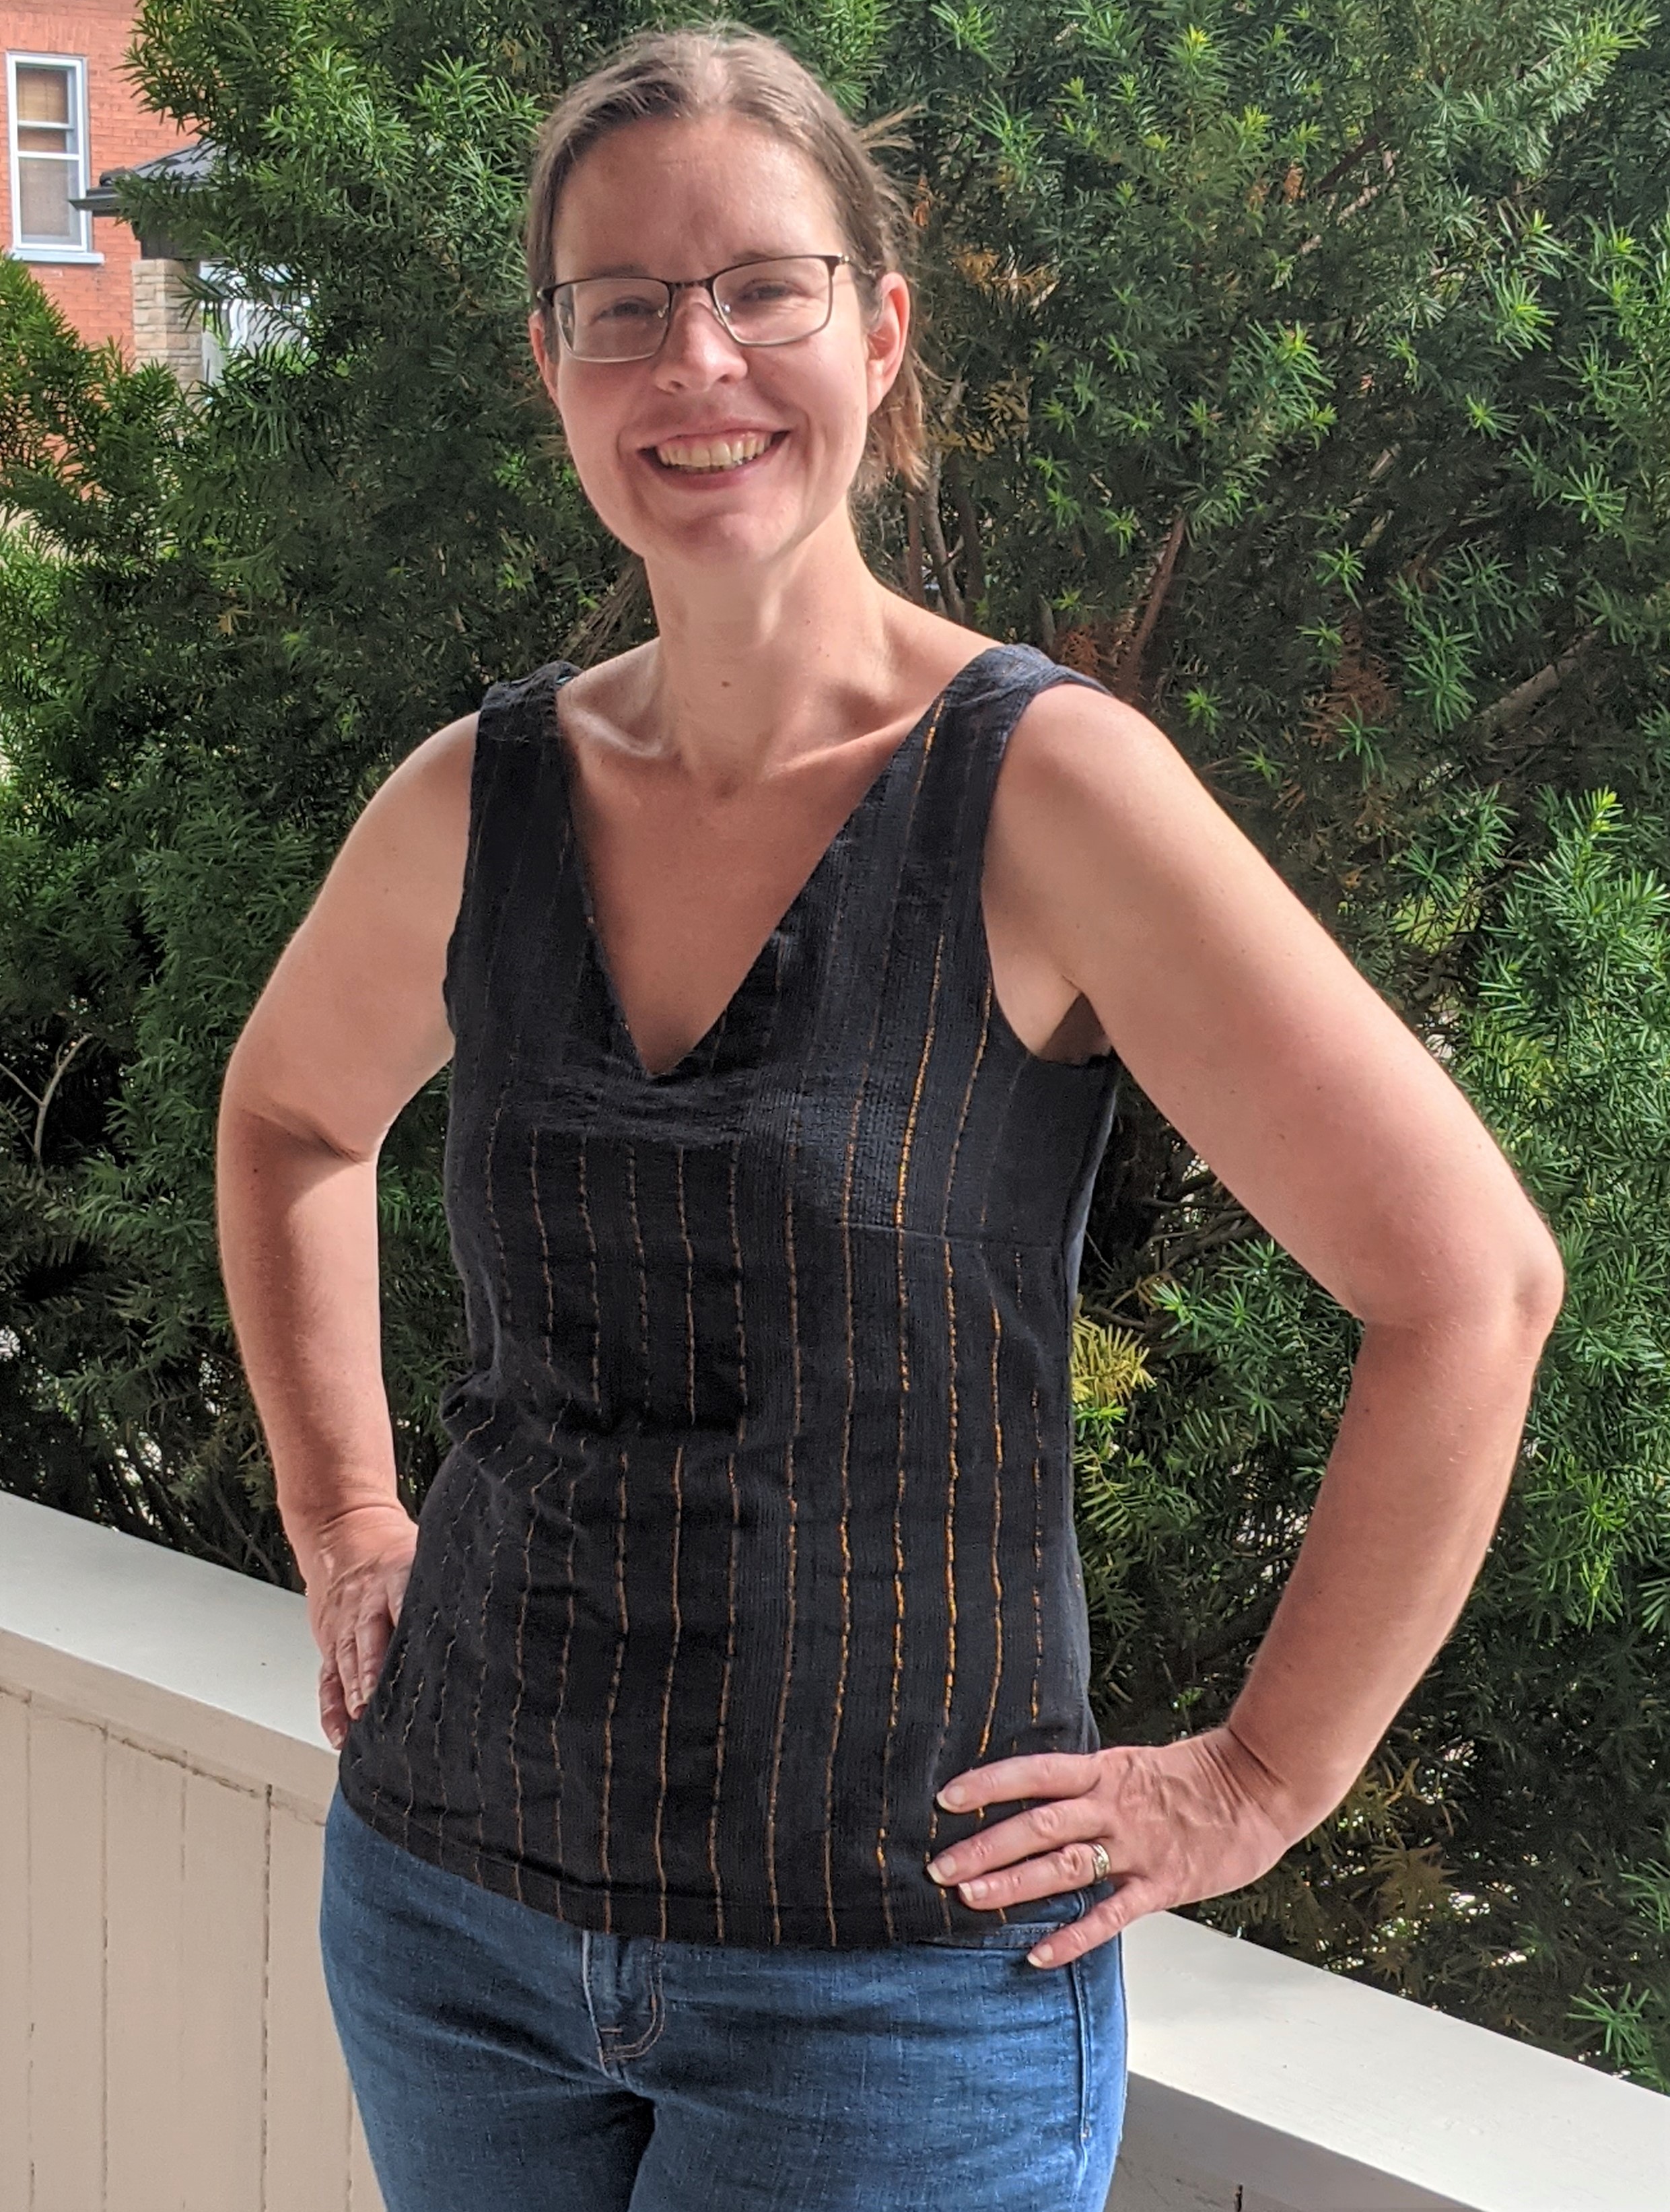 A photo of Jenn standing outside, wearing jeans and a black sleeveless top with bronze sparkly stripes.